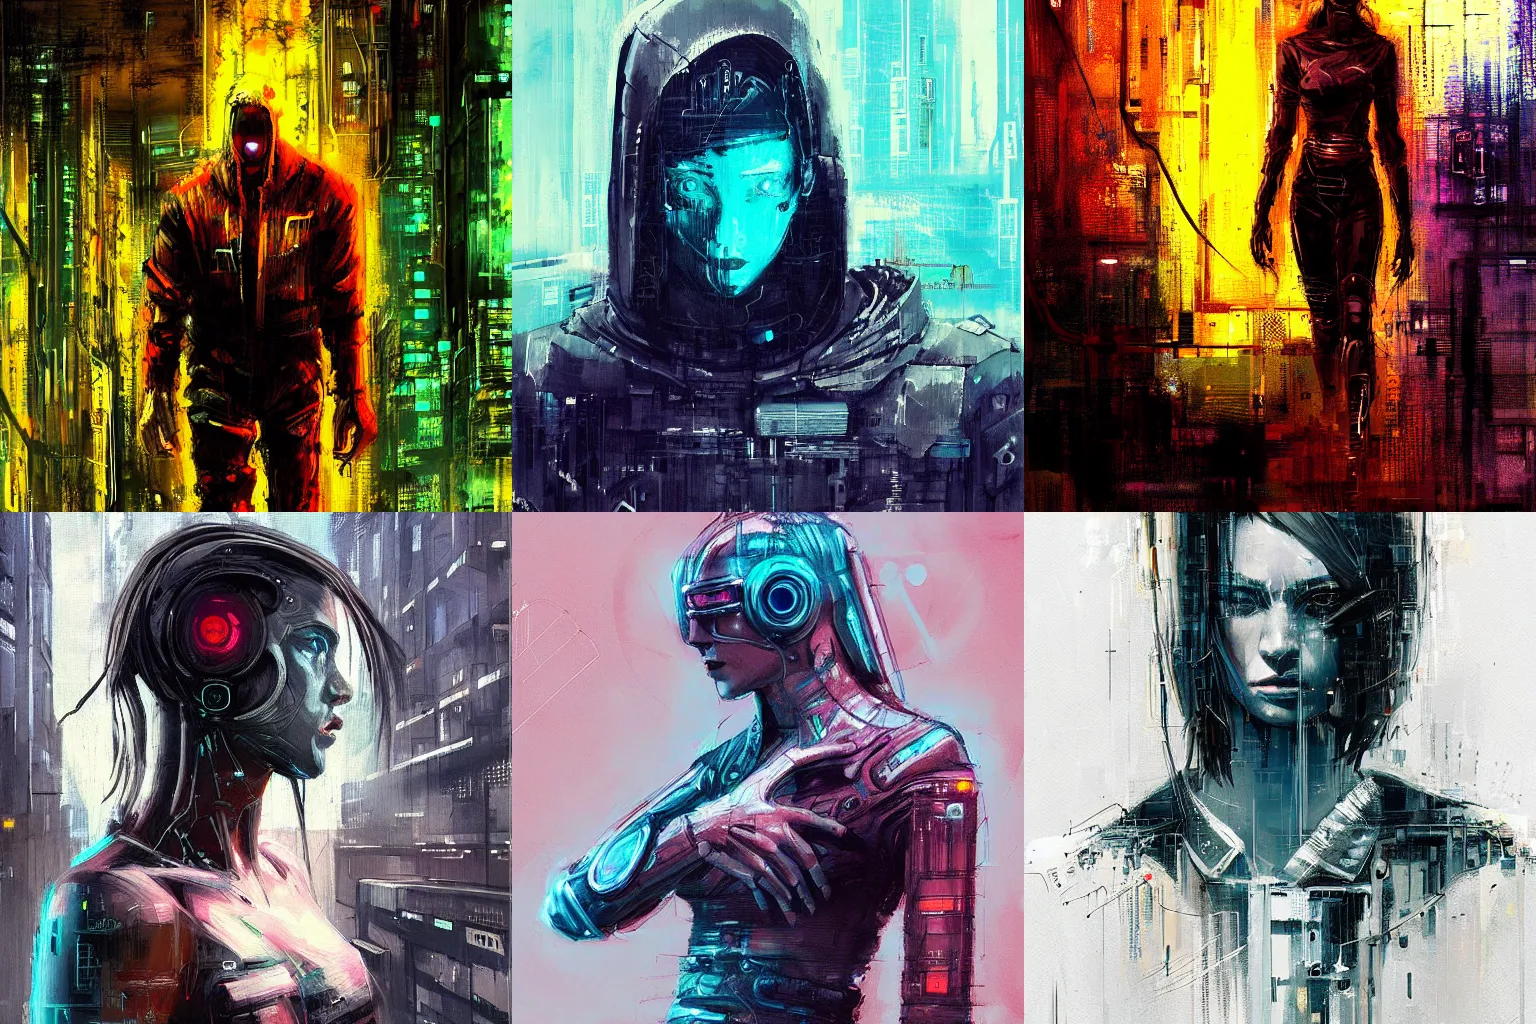 Prompt: cyberpunk android by Alena Aenami, by Guy Denning